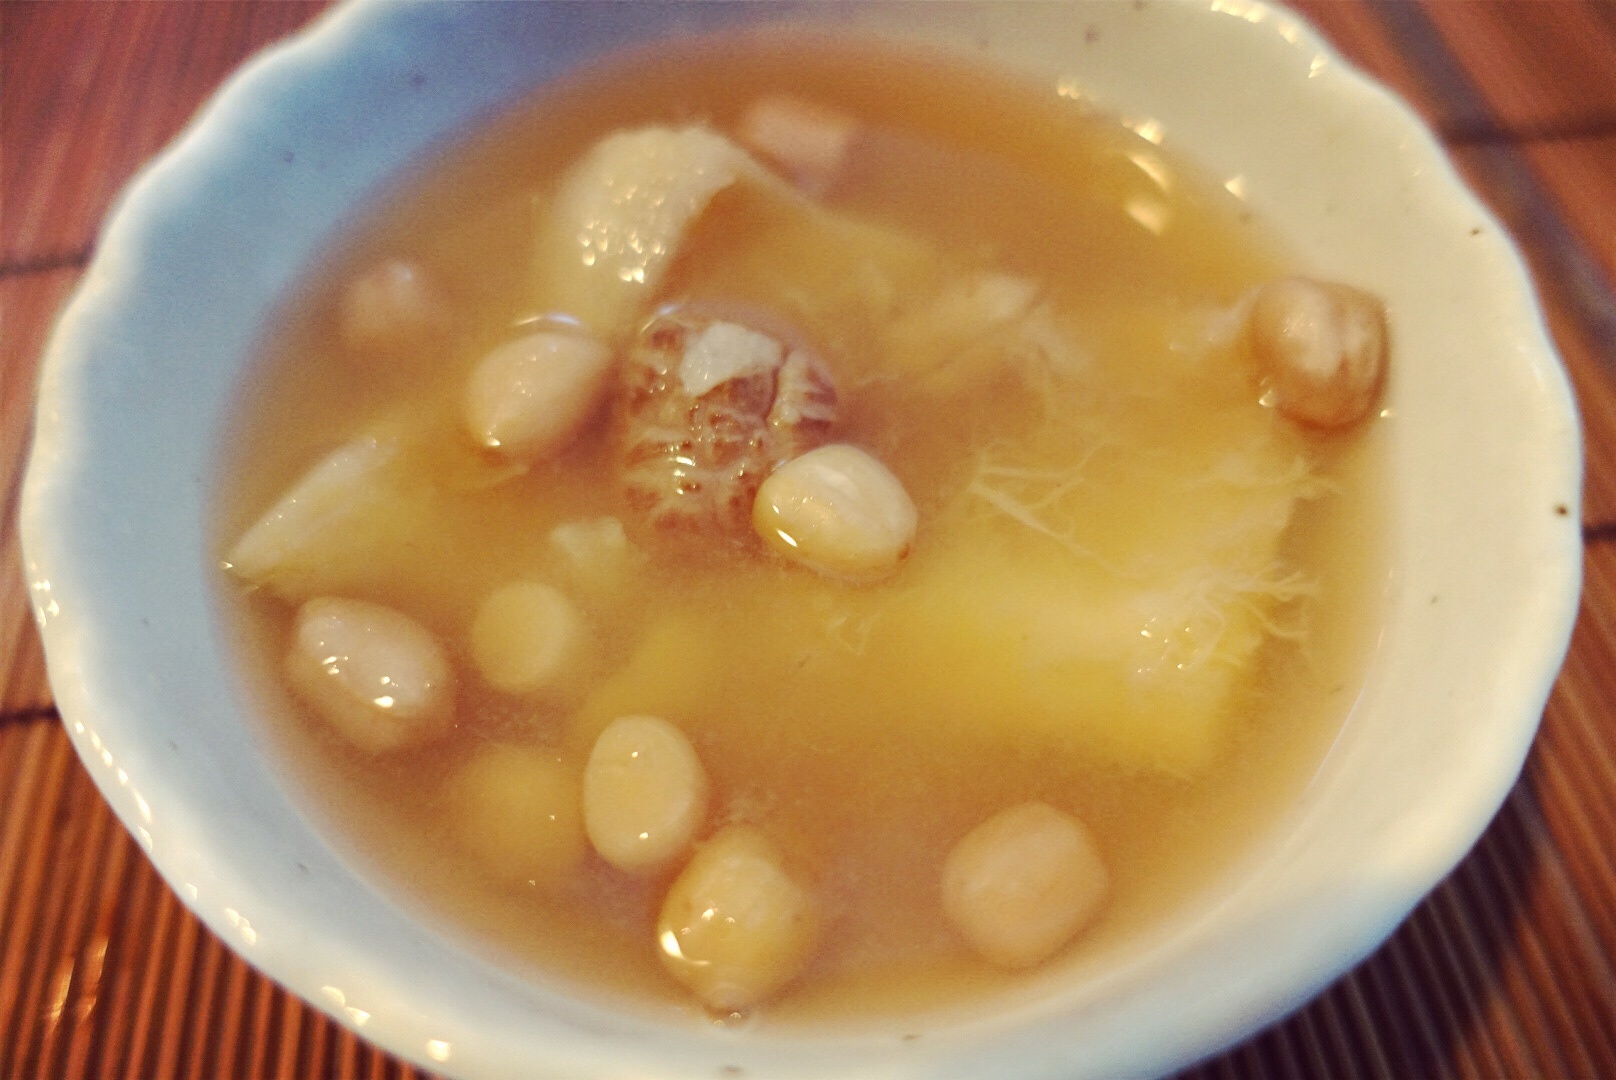 
Pomegranate lotus lays the practice of soup, how is Durian earthnut soup done delicious